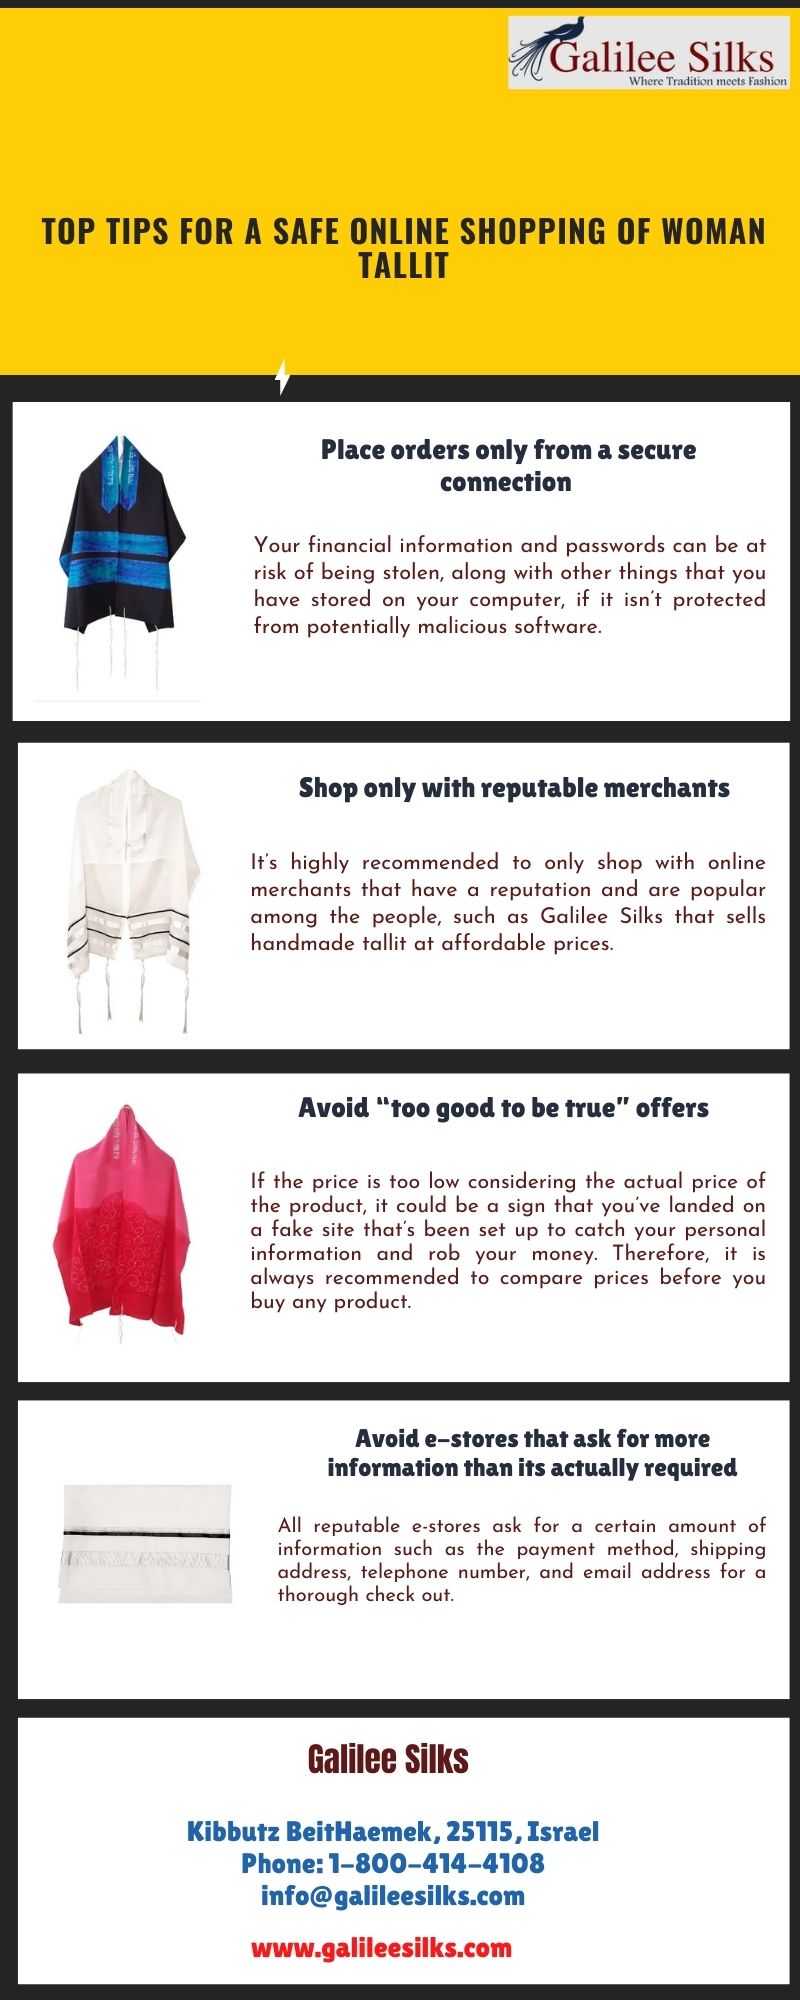 Top tips for a safe online shopping of woman tallit The one-stop online shop for Judaica products, Galilee Silks, is designed to help you find the right woman tallit in your preferred size, color, and pattern. For more details, visit: https://www.galileesilks.com/collections/womens-tallit-1
 by amramrafi